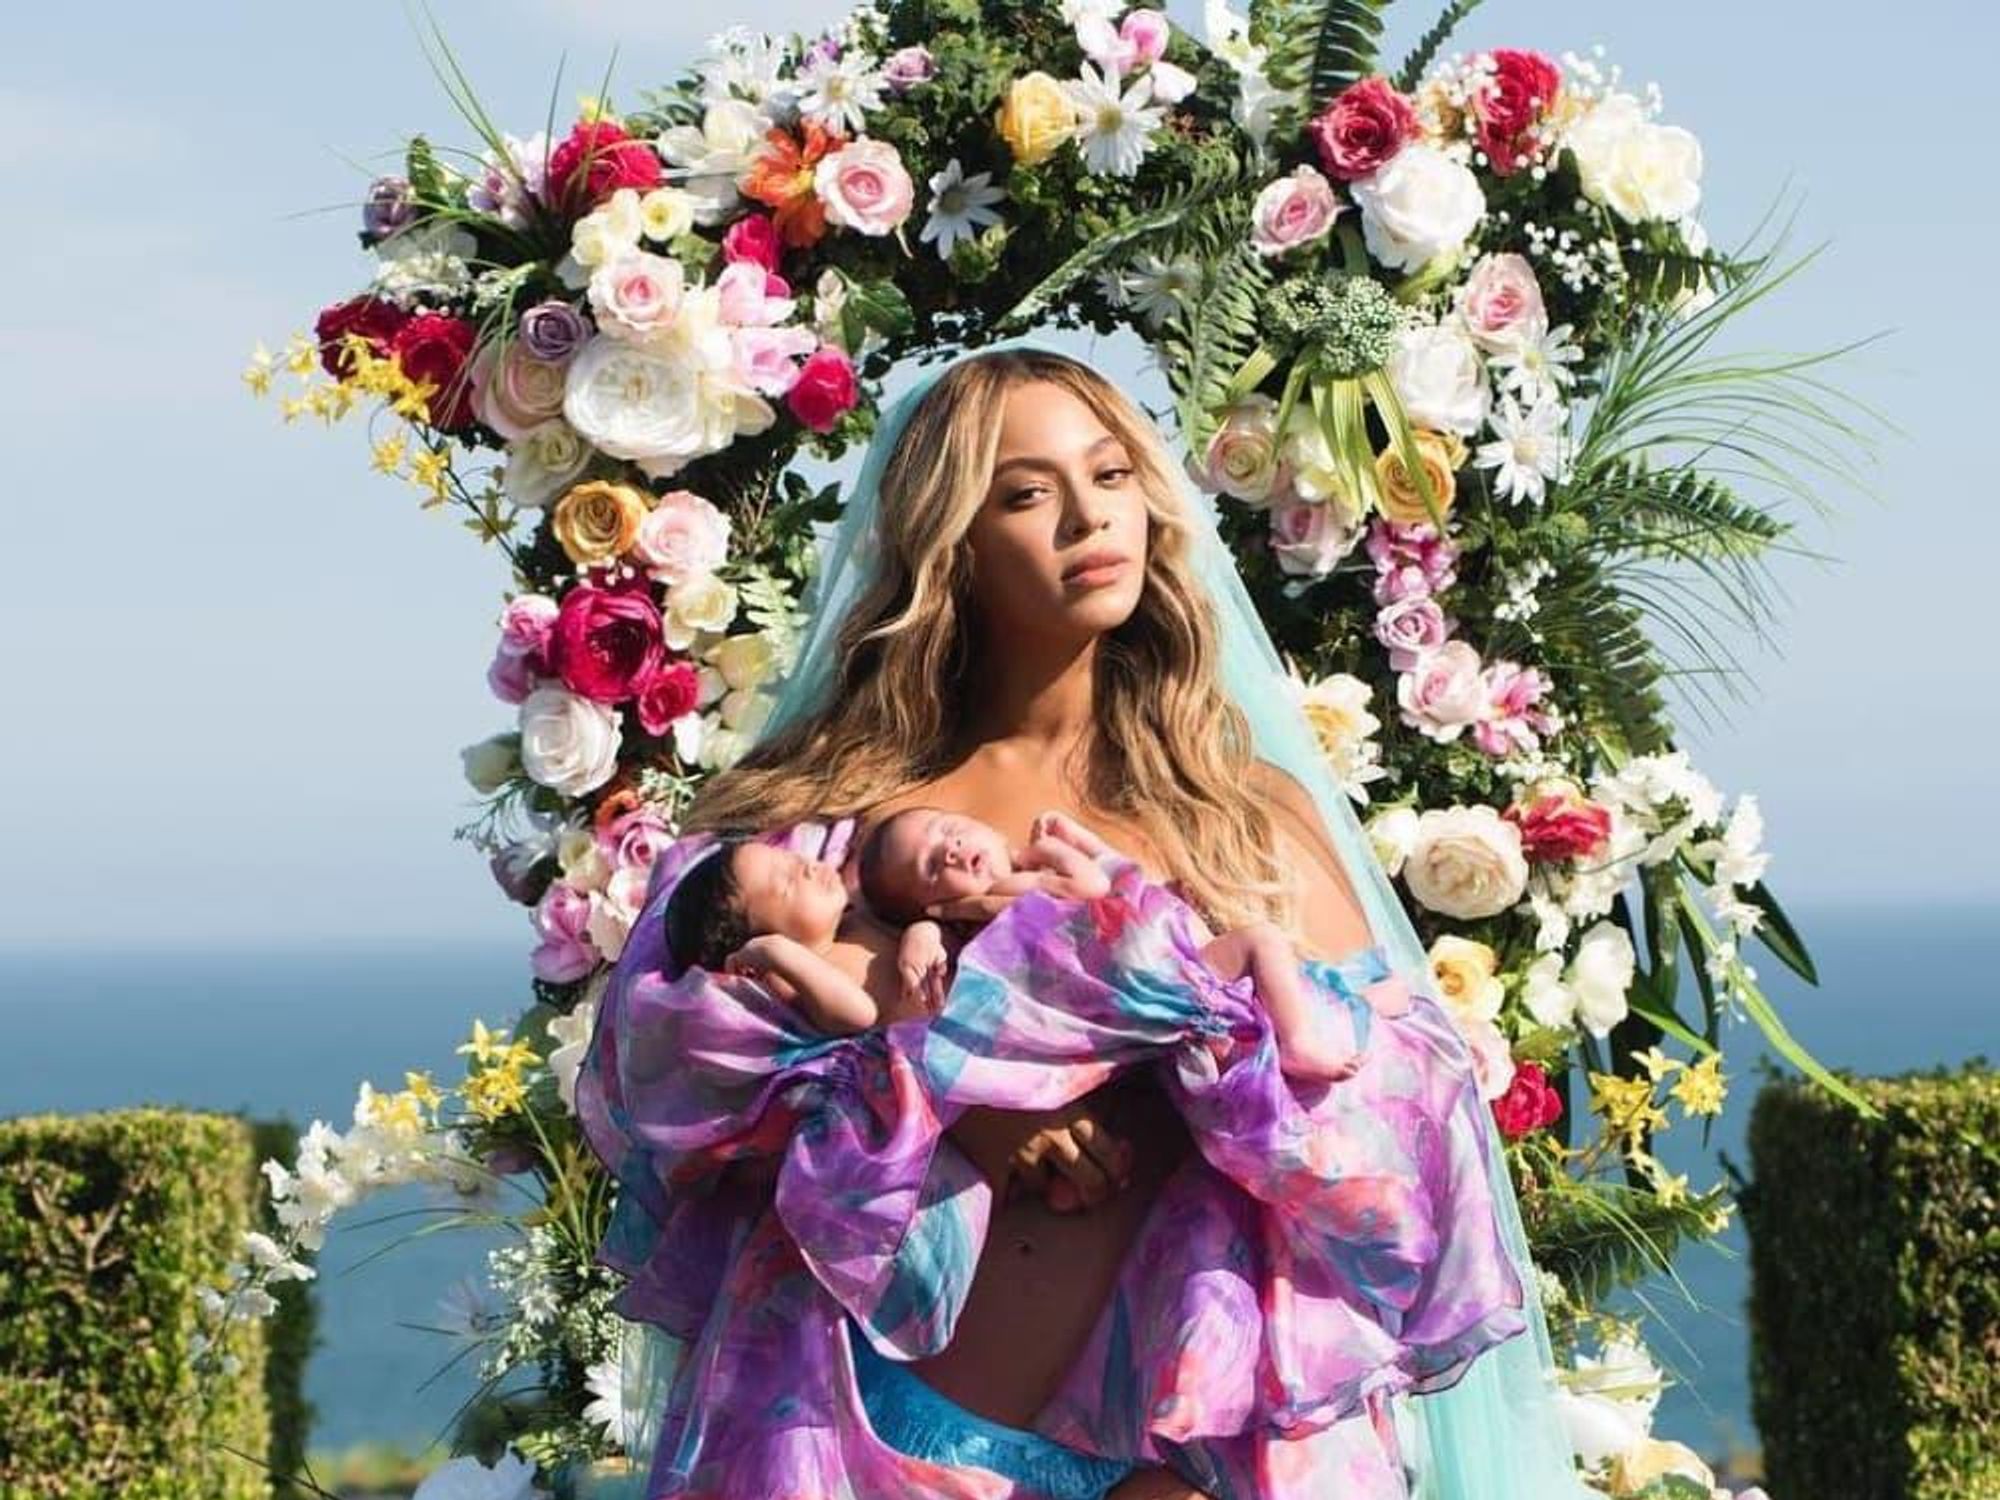 Houston, Beyonce, July 2017, Beyonce shares first photo of twins